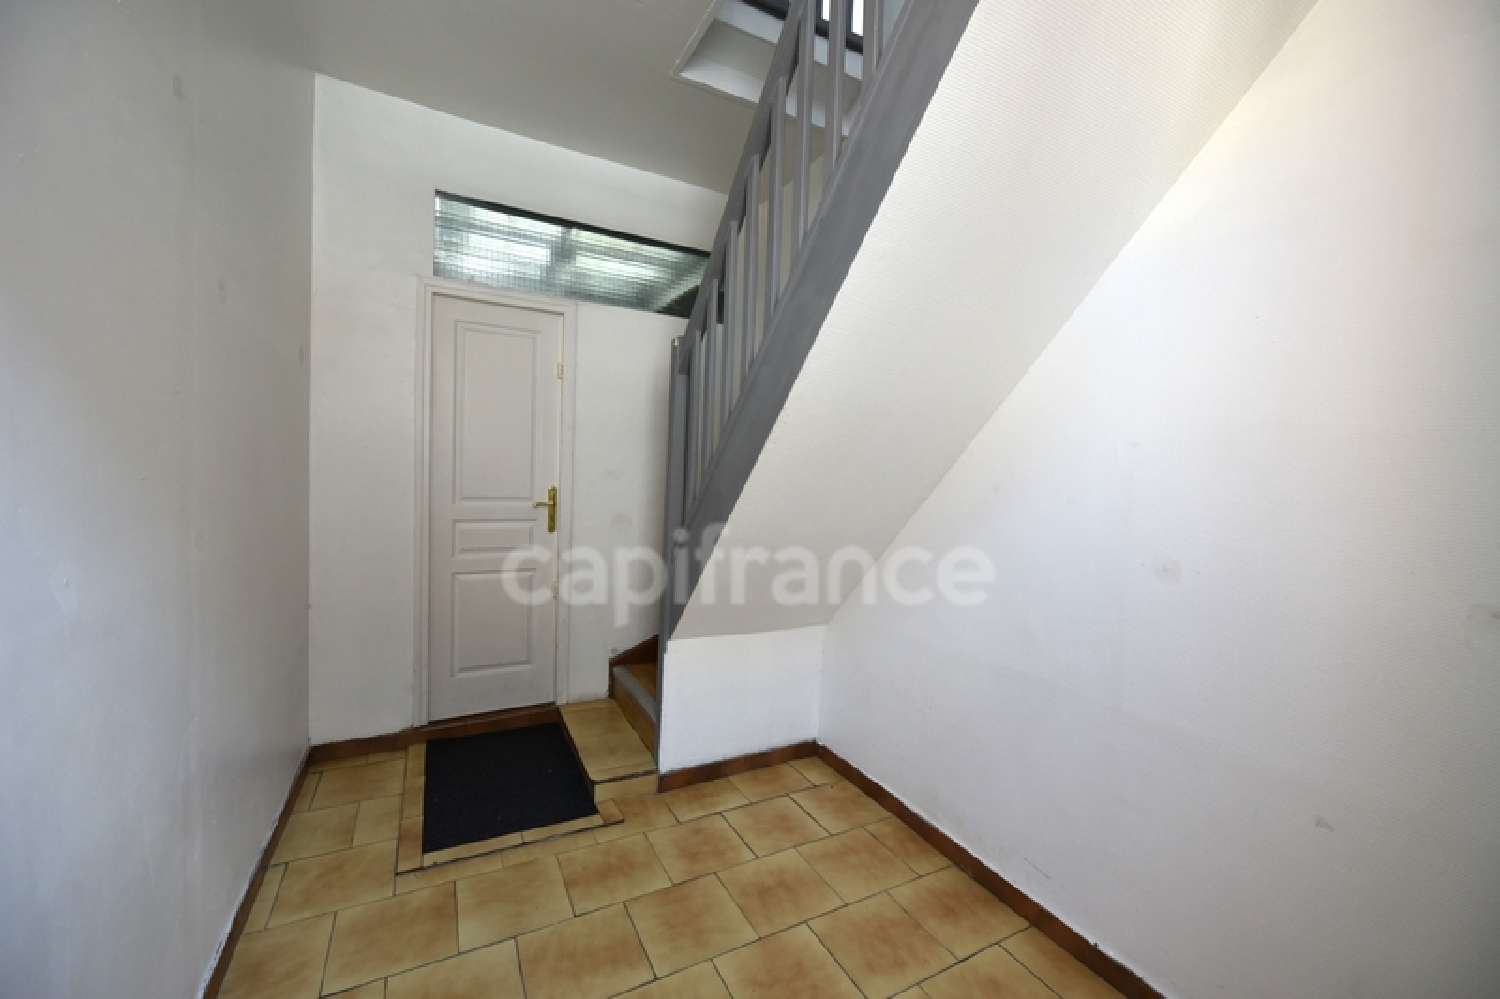  for sale house Tourcoing Nord 5